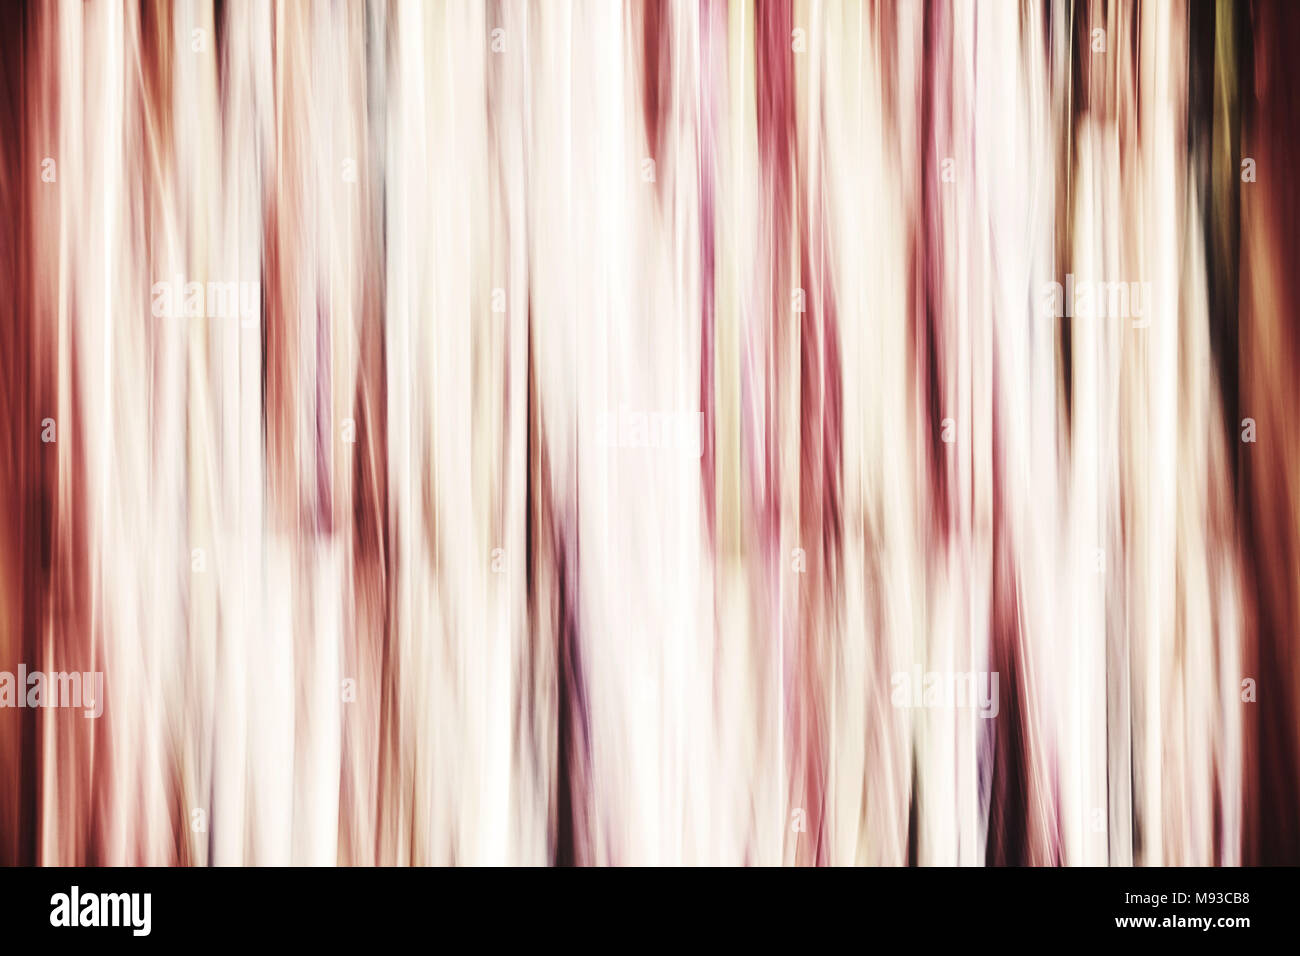 Motion blurred abstract background or wallpaper. Stock Photo